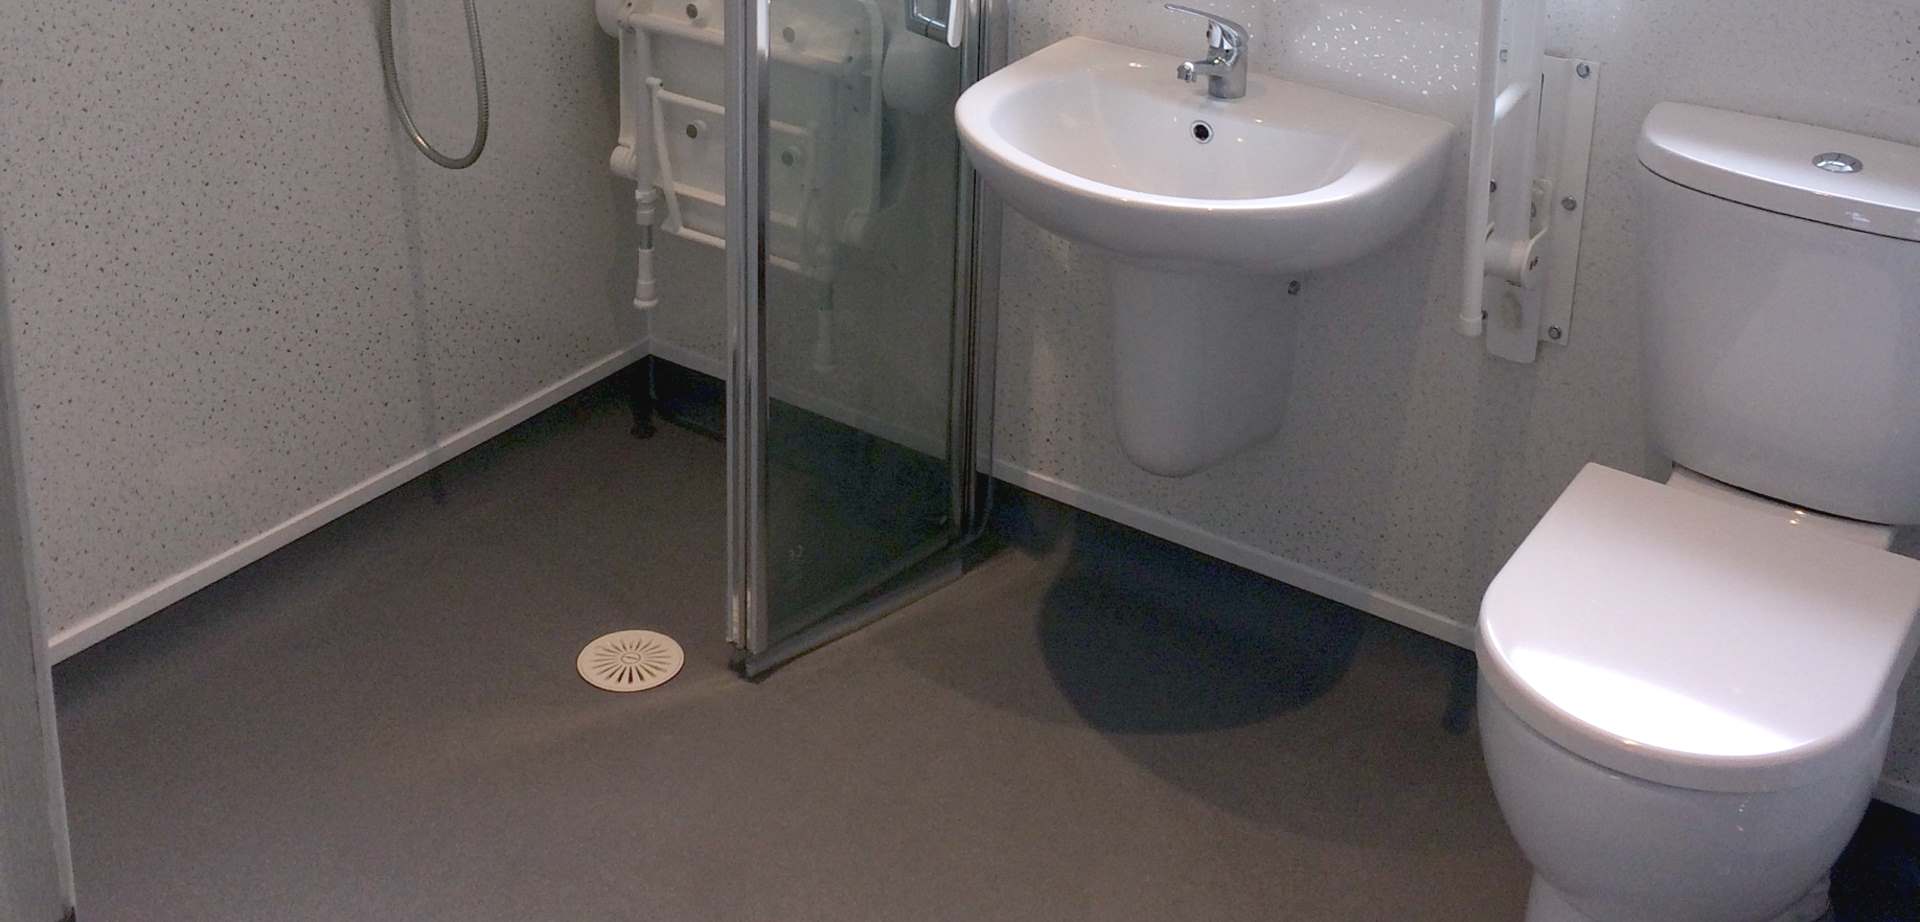 Wetroom Installers in Birmingham and The Midlands